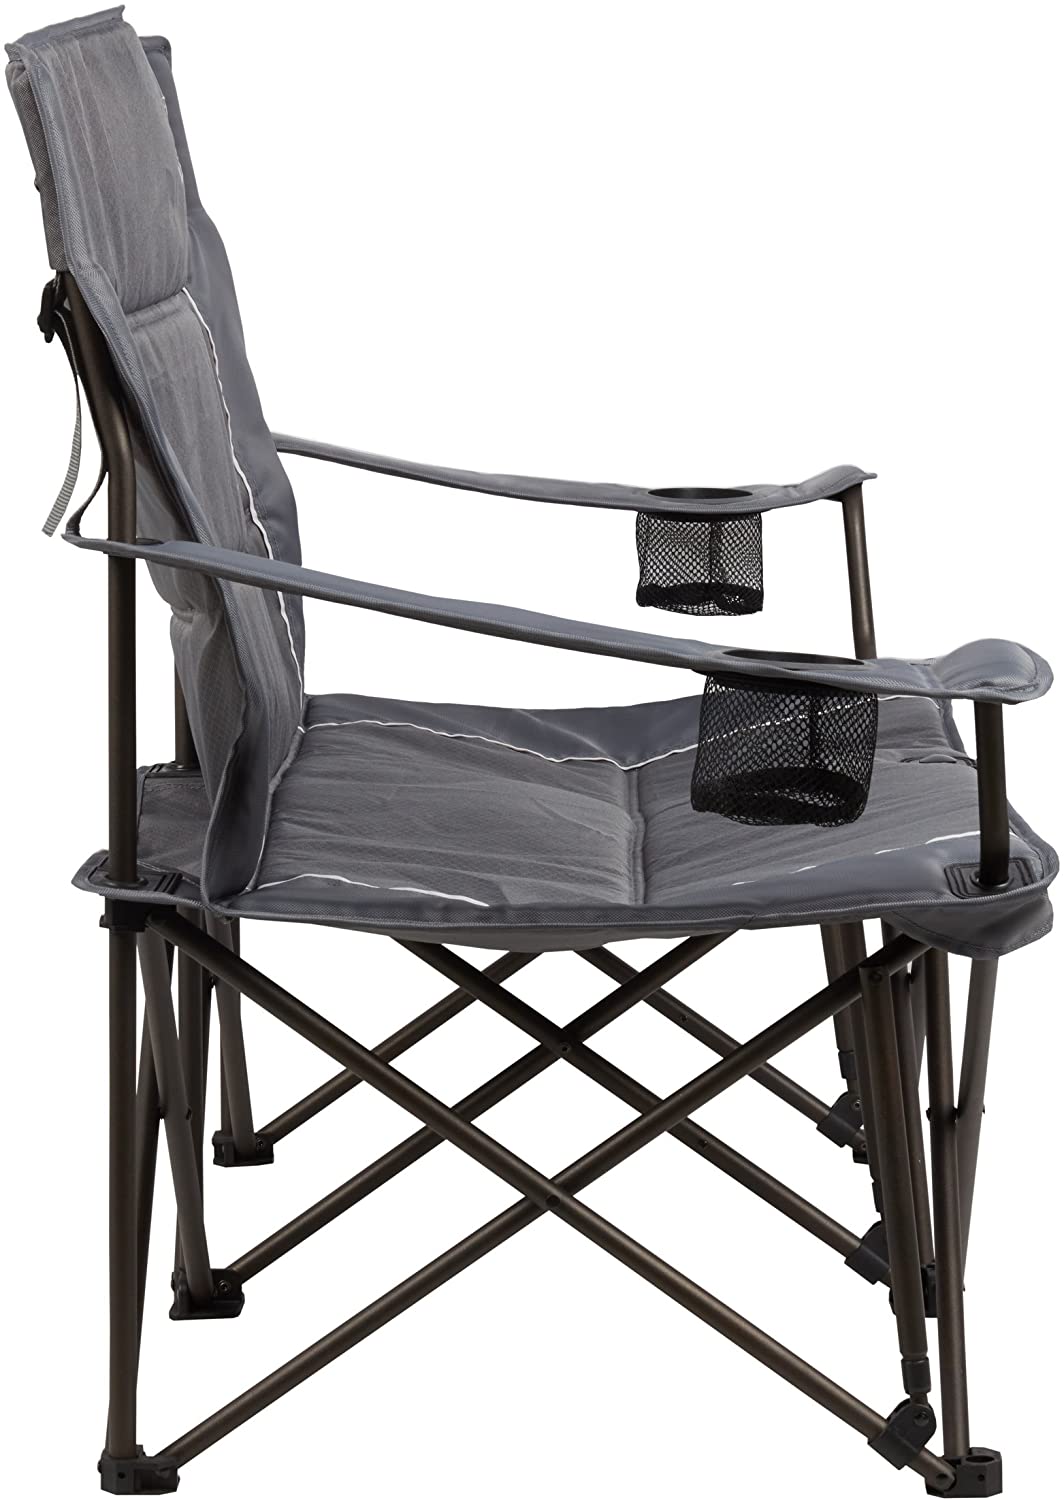 Leisure Folding Double Seat Outdoor Camping Chair